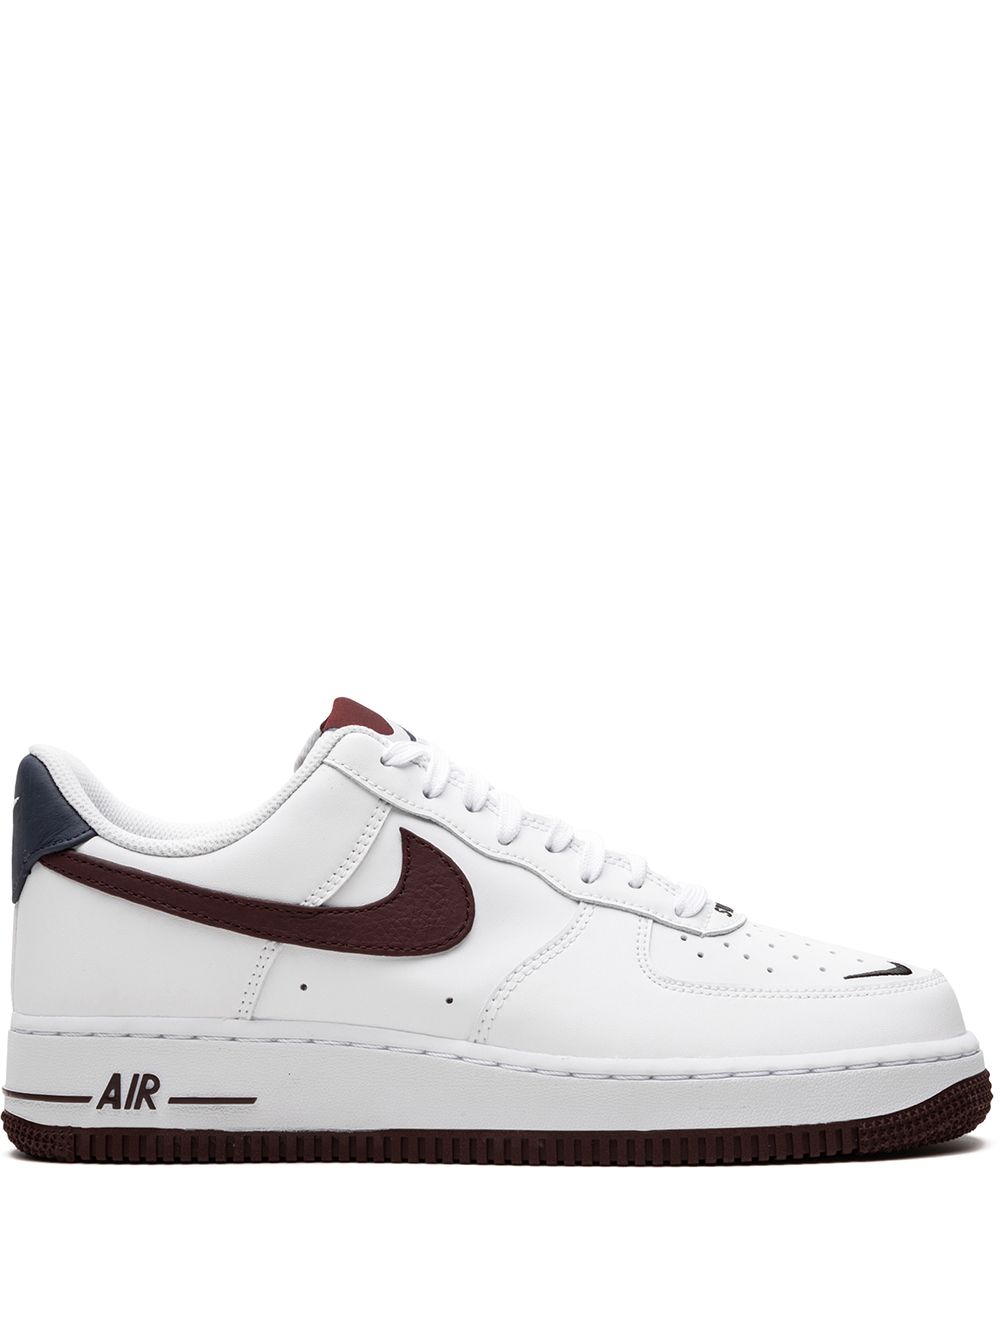 Nike Air Force 1 '07 LV8 4 sneakers - Wit